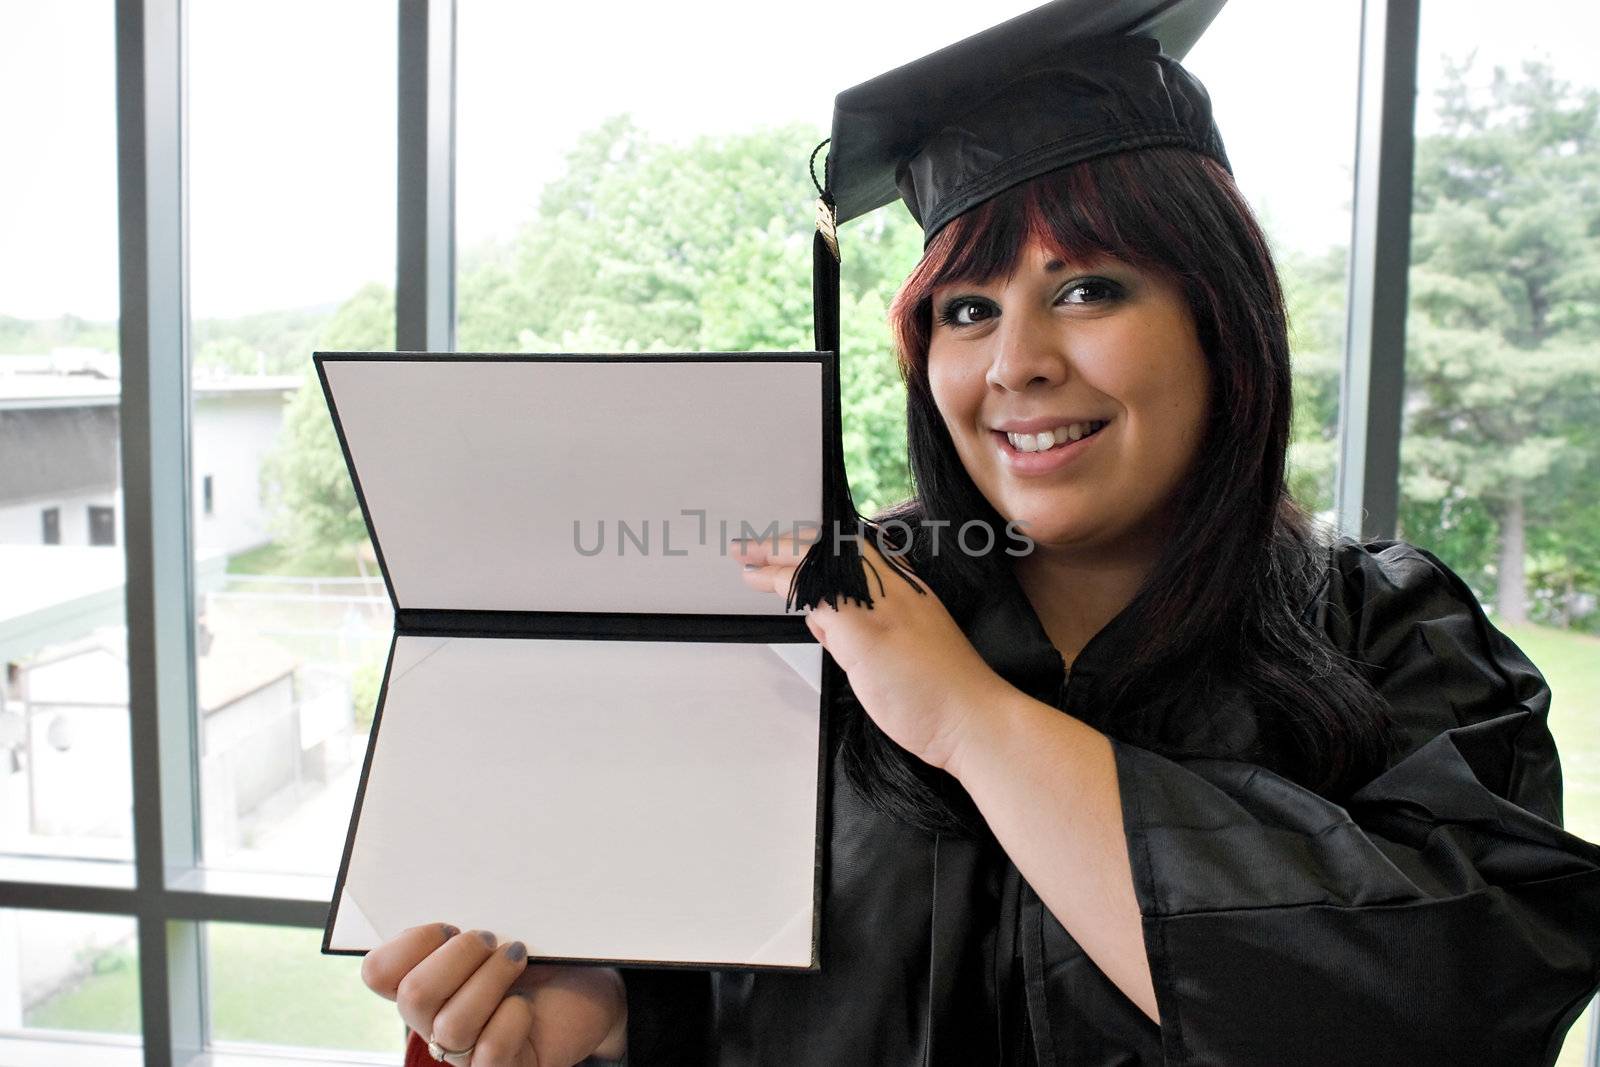 A student that recently had a school graduation posing proudly with her diploma indoors.